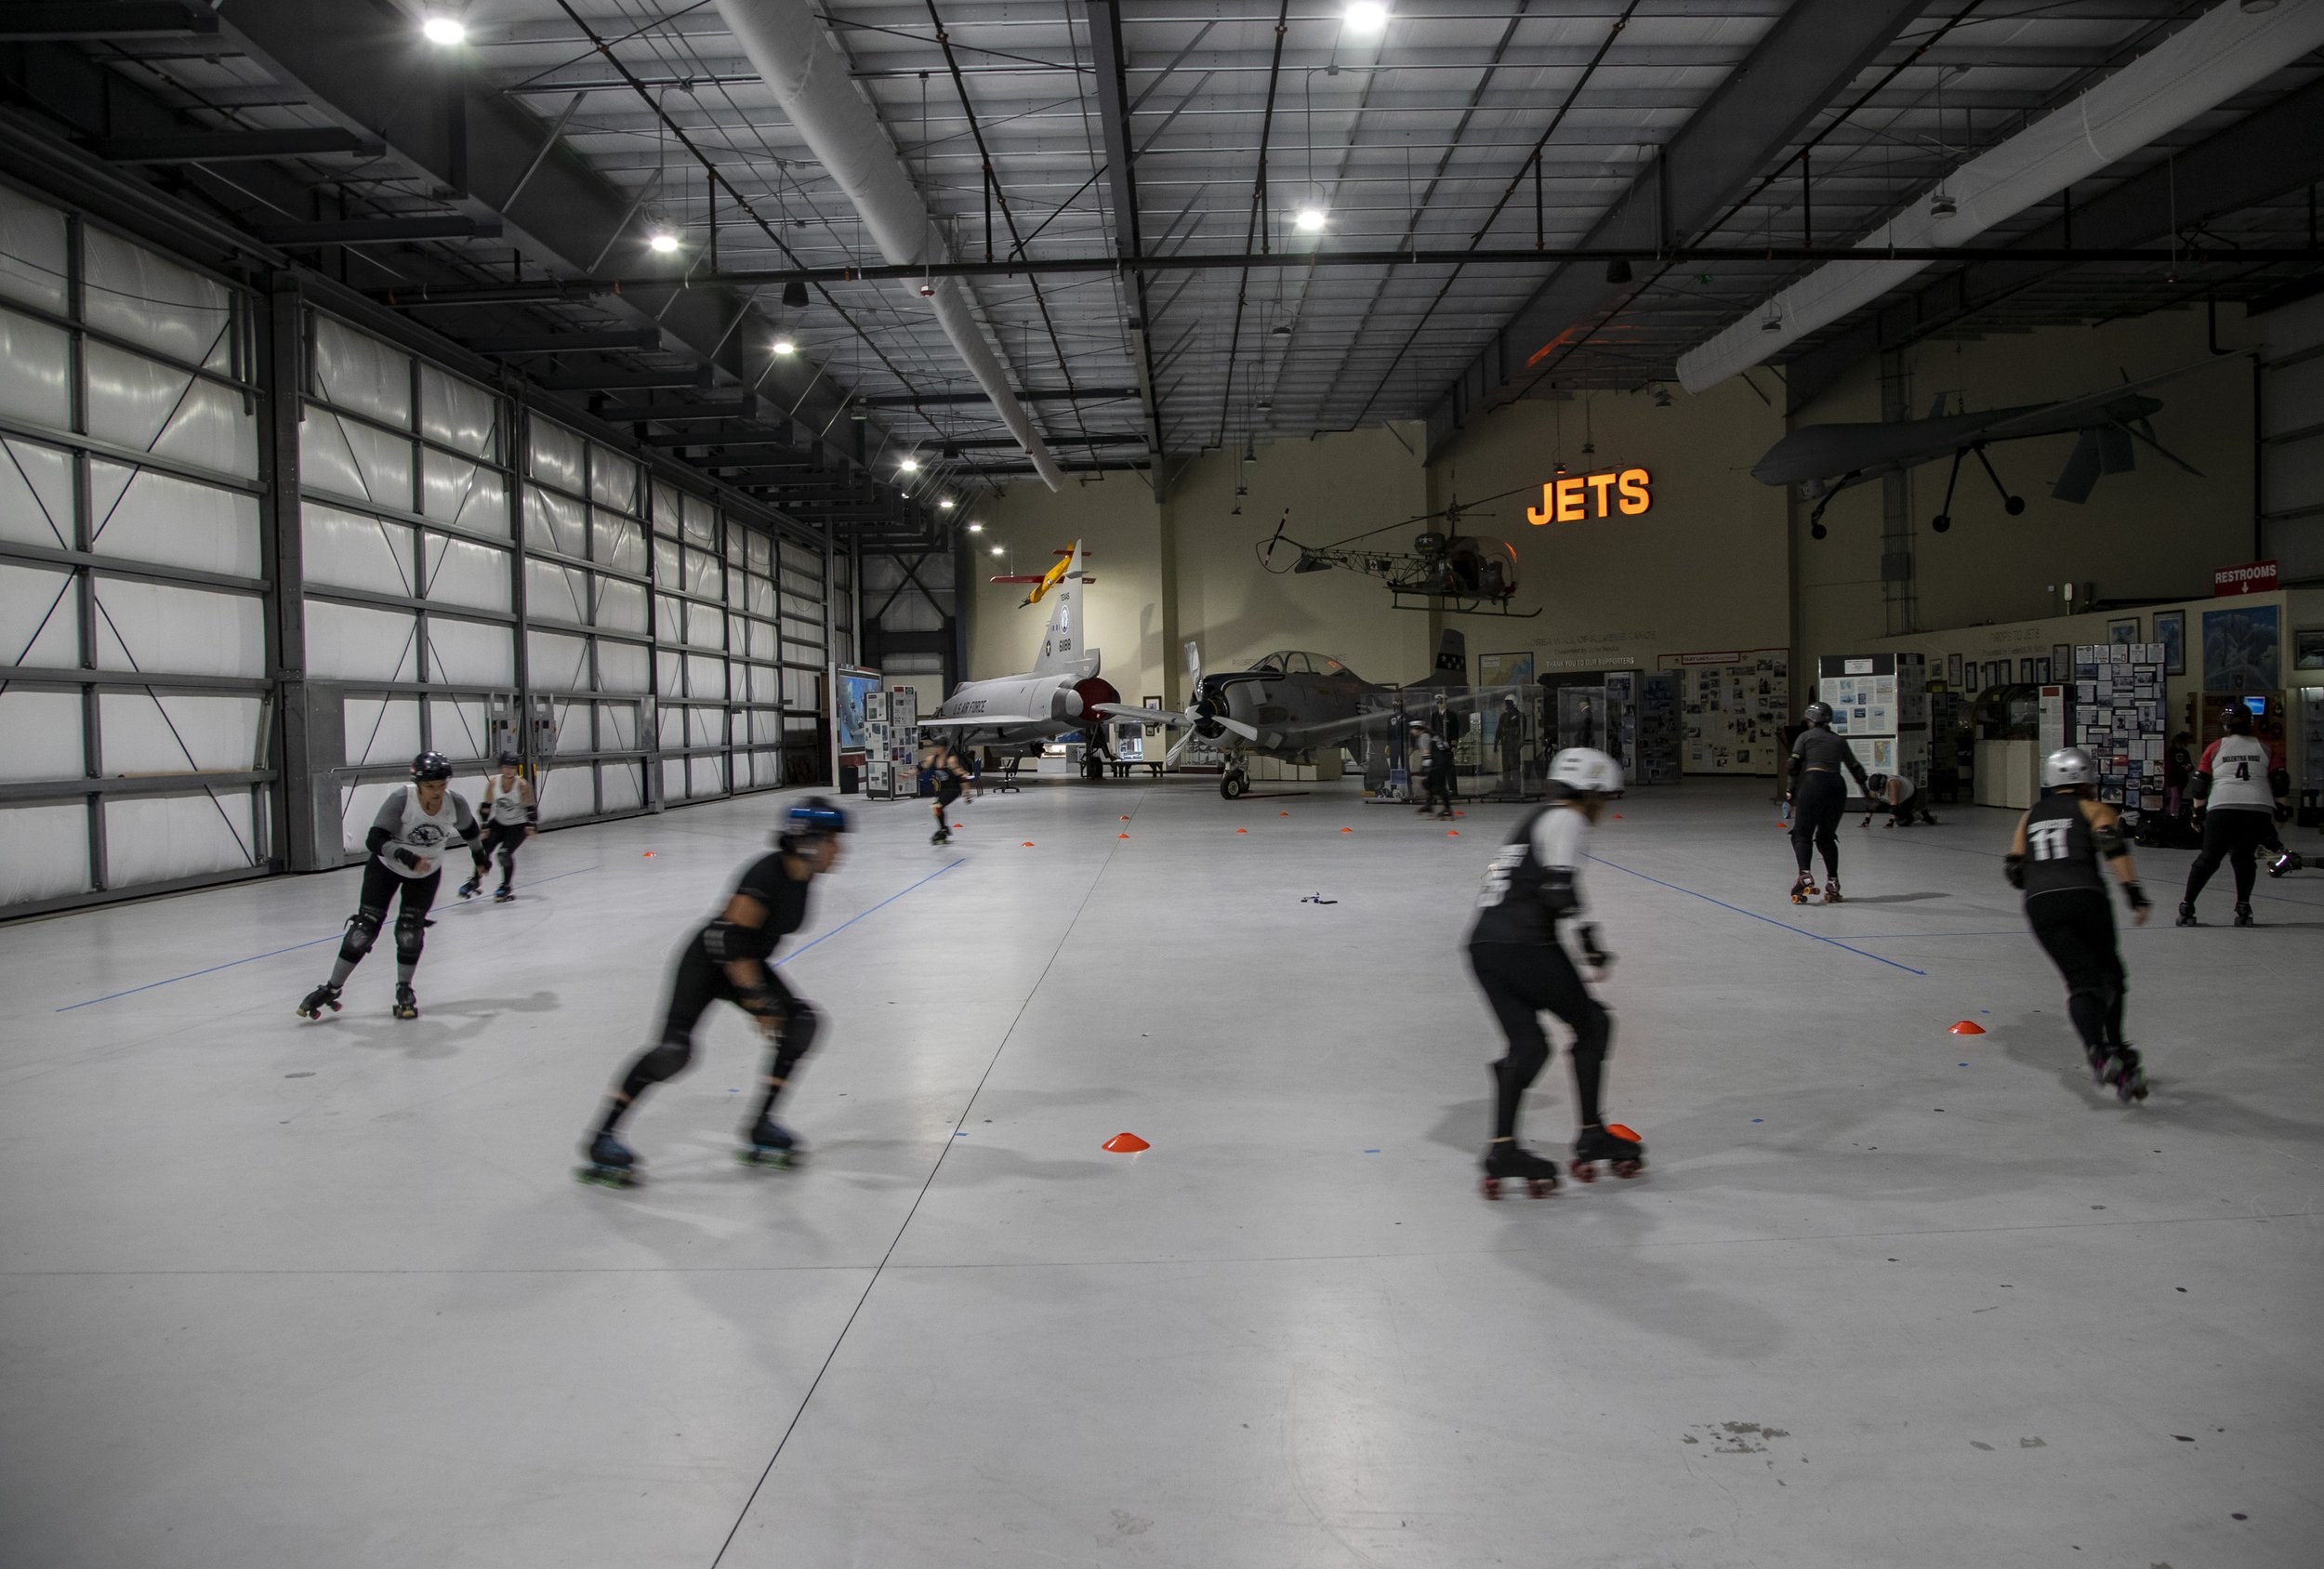  Skaters take laps to warm up before their practice at the Palm Springs Air Museum in Palm Springs, Calif., Monday. The team was practicing for the first time in their new home venue where they would soon be hosting their homecoming game.  